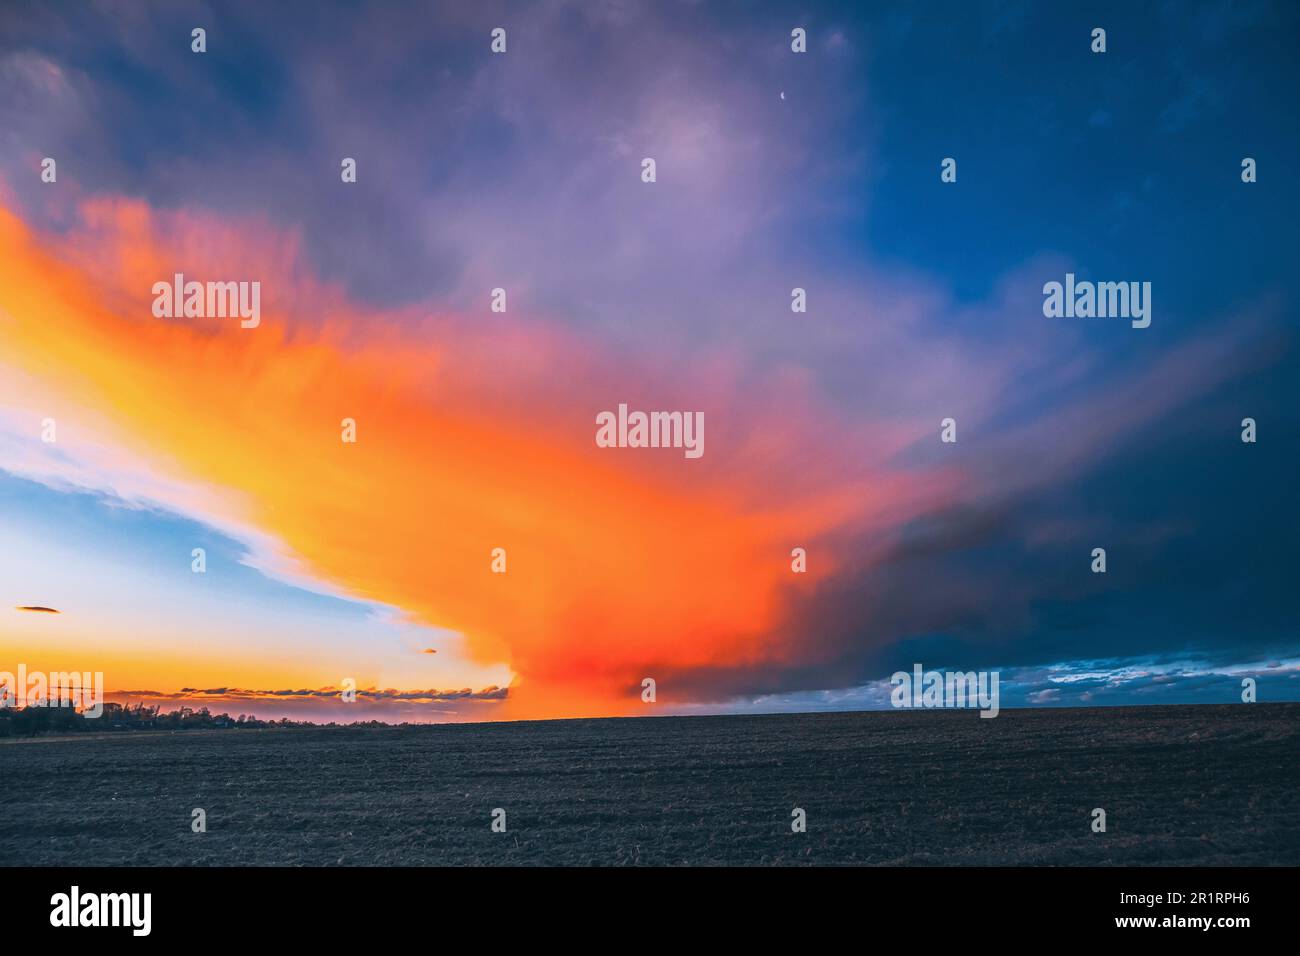 Spring Field At Sunset Sunrise. Morning Sunrise Evening Sunset Sky Above Dark Countryside Meadow Landscape. Spring Nature. Stock Photo